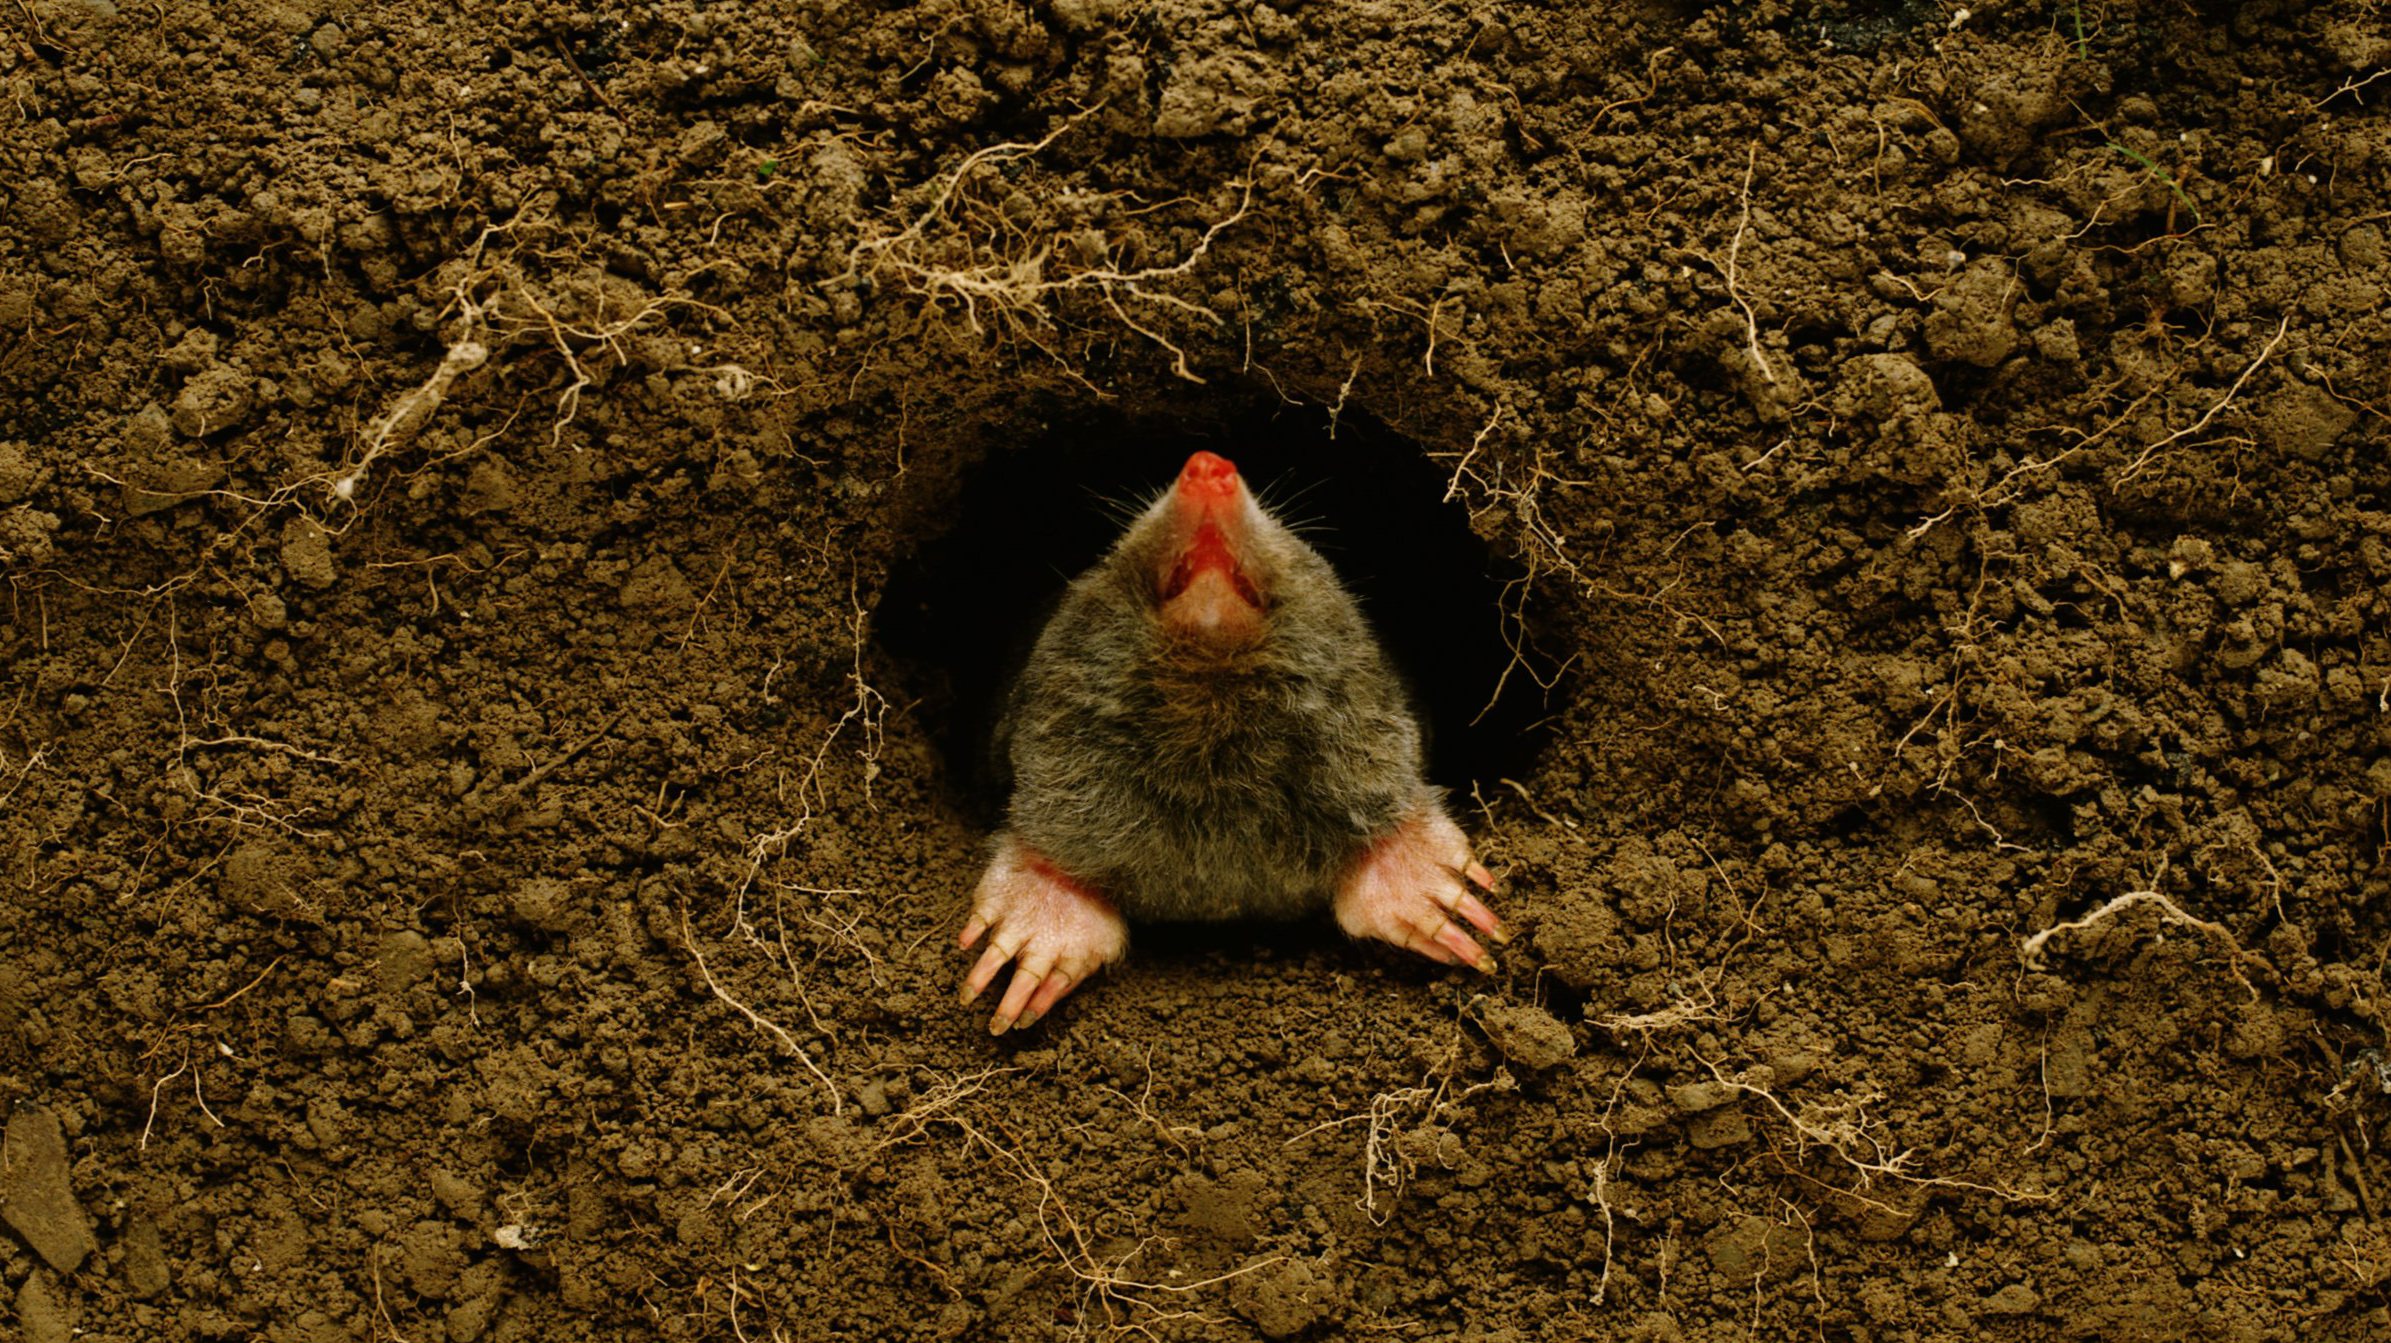 Mole emerging from burrow